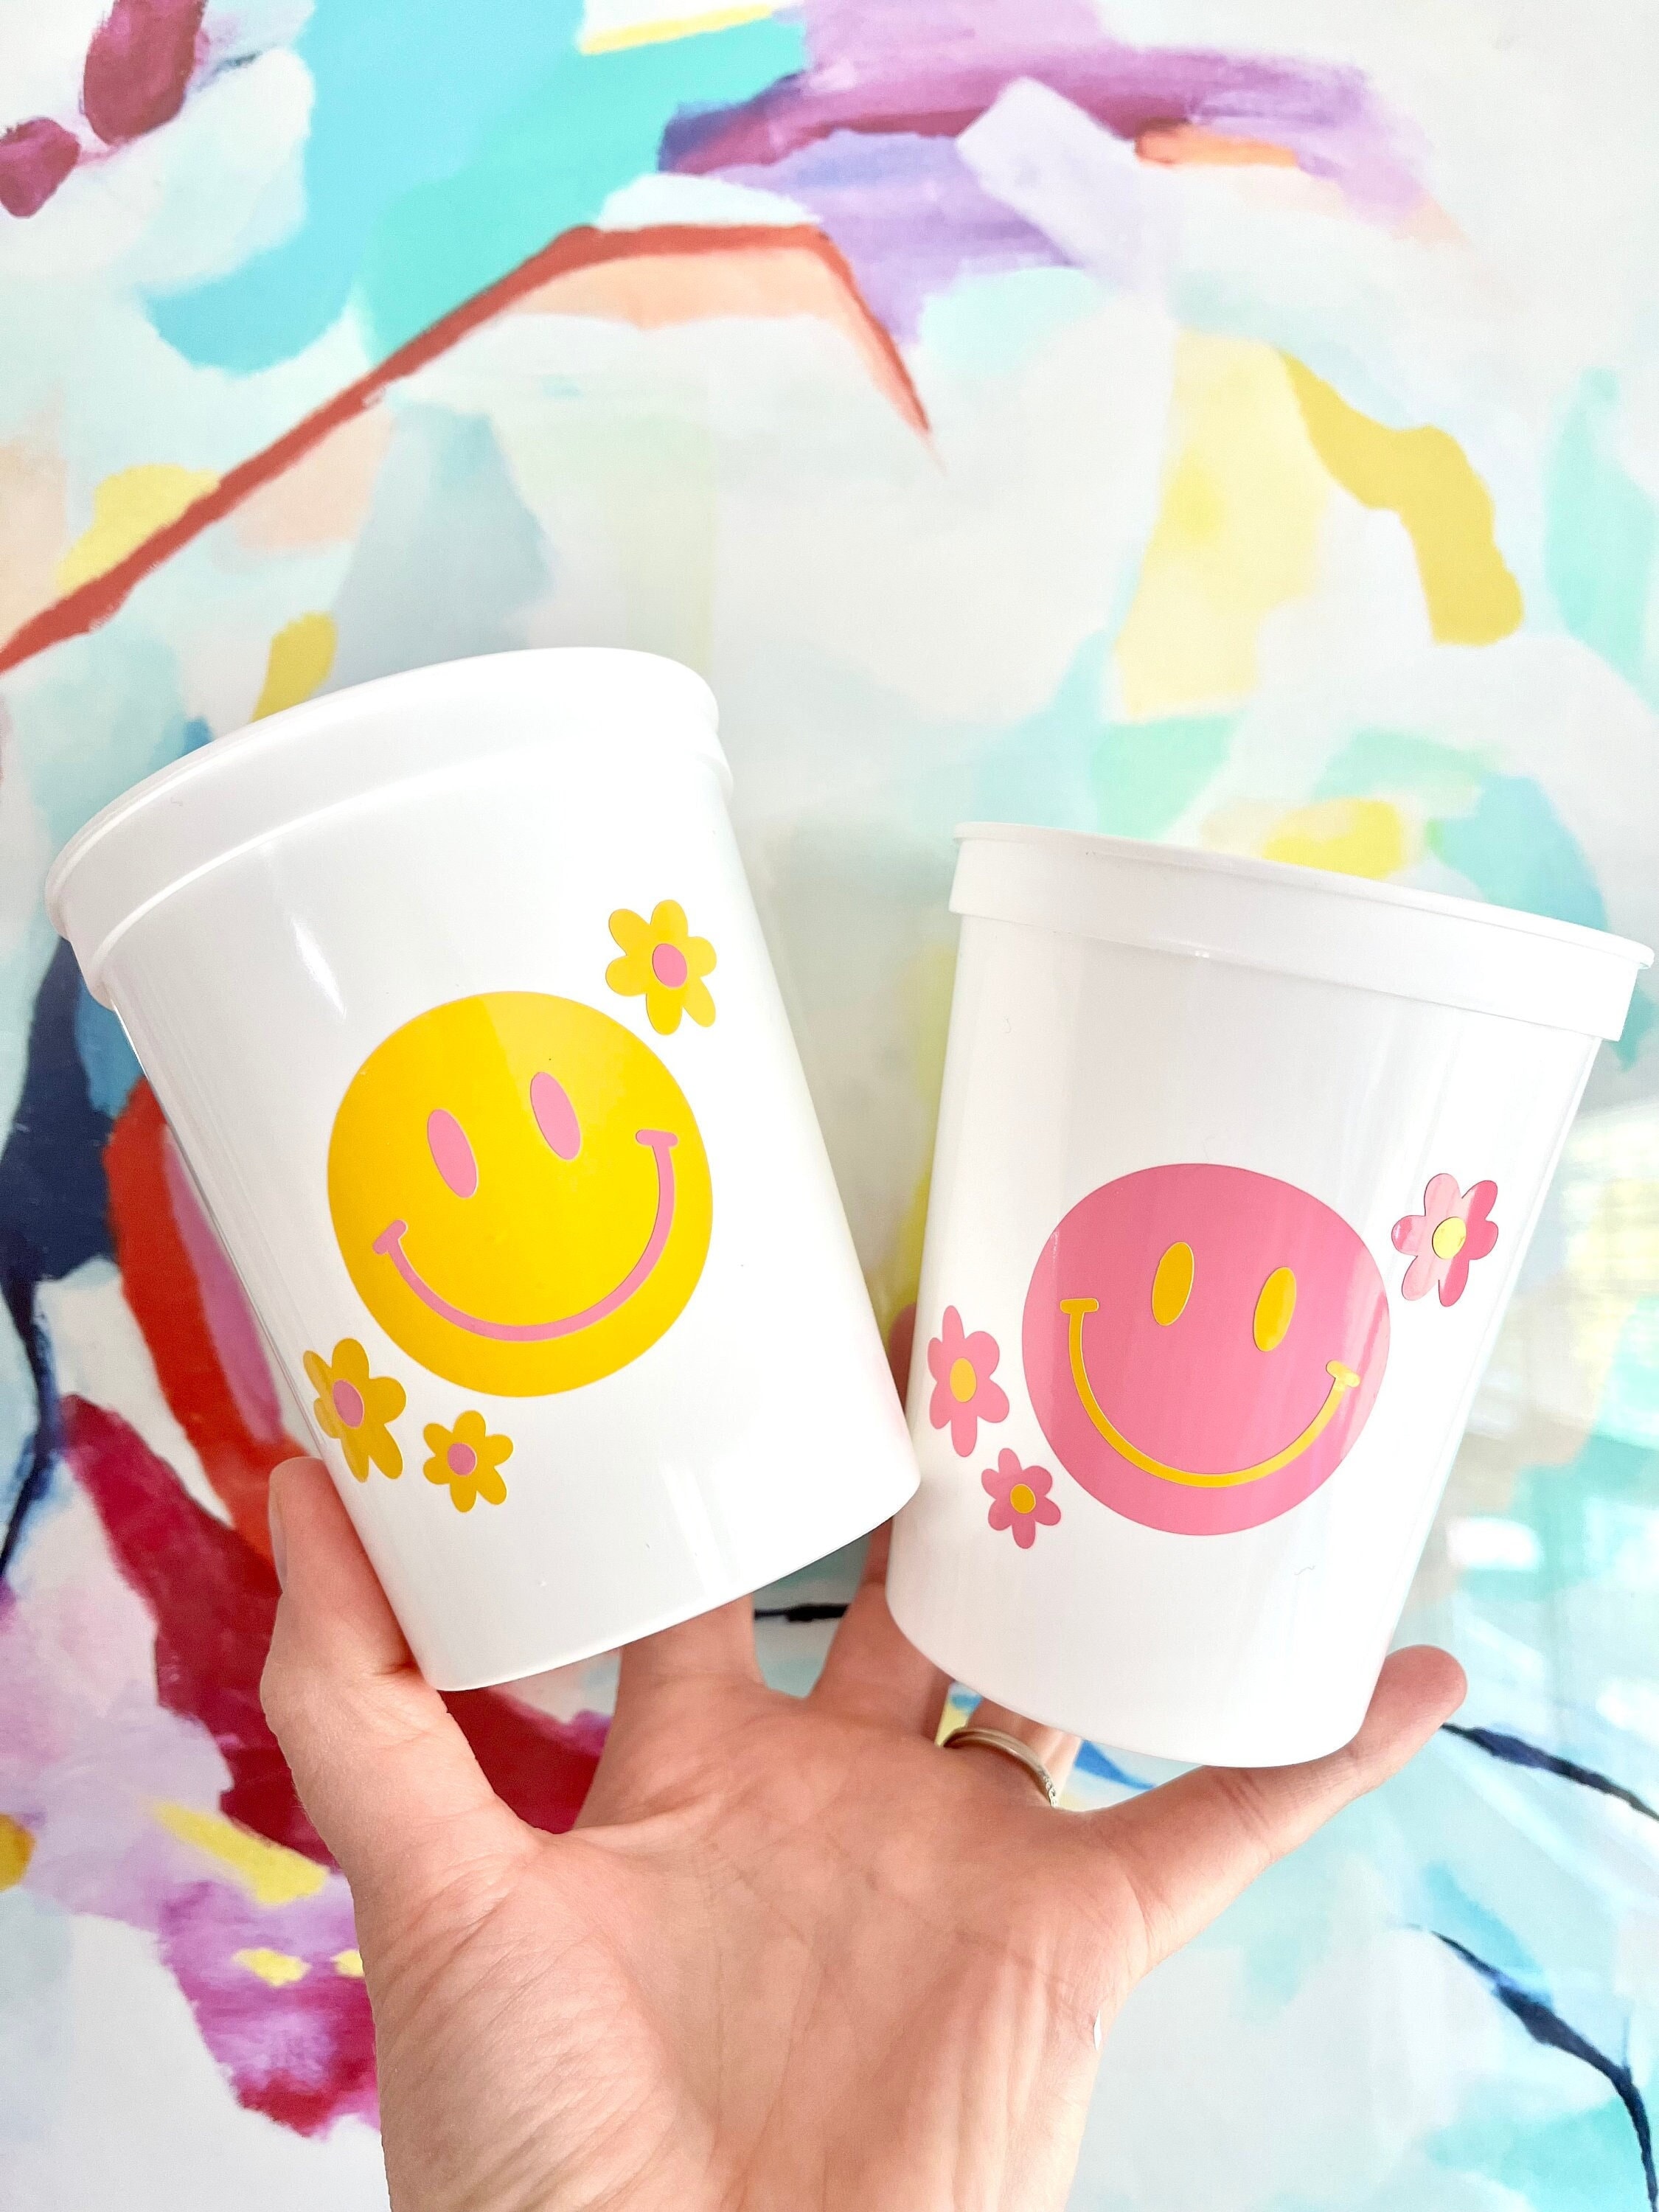 Smiley Face Trendy Aesthetic Tumbler With Straw Retro Smiley Face Iced Coffee  Cup Cold Coffee Cup Gift Teenage Girl Retro Cute 